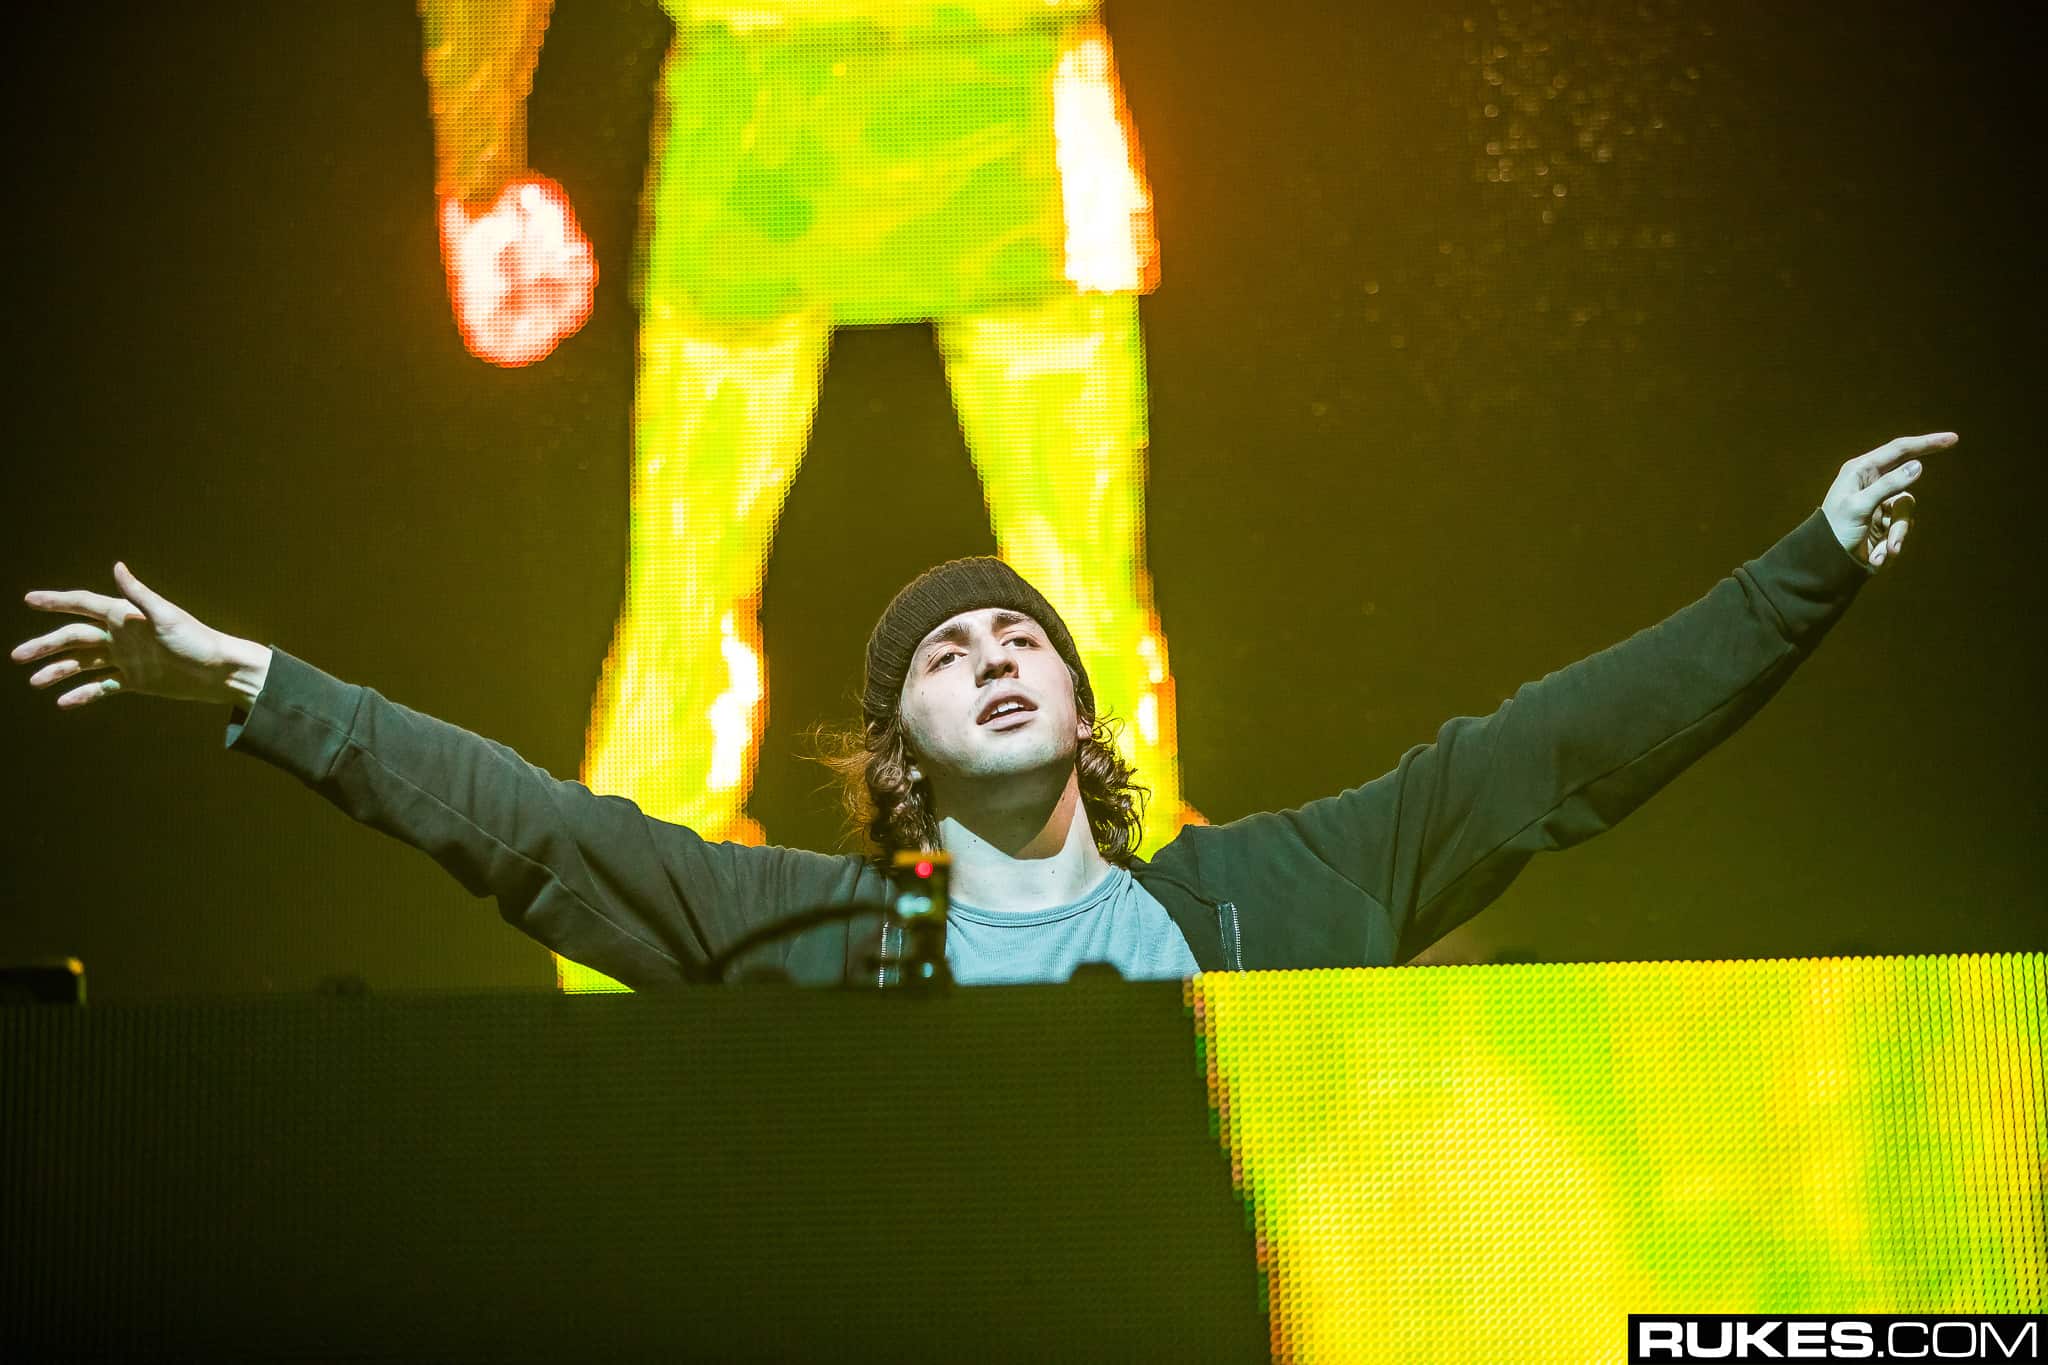 8 years of ‘Worlds’: how Porter Robinson changed the electronic music scene forever